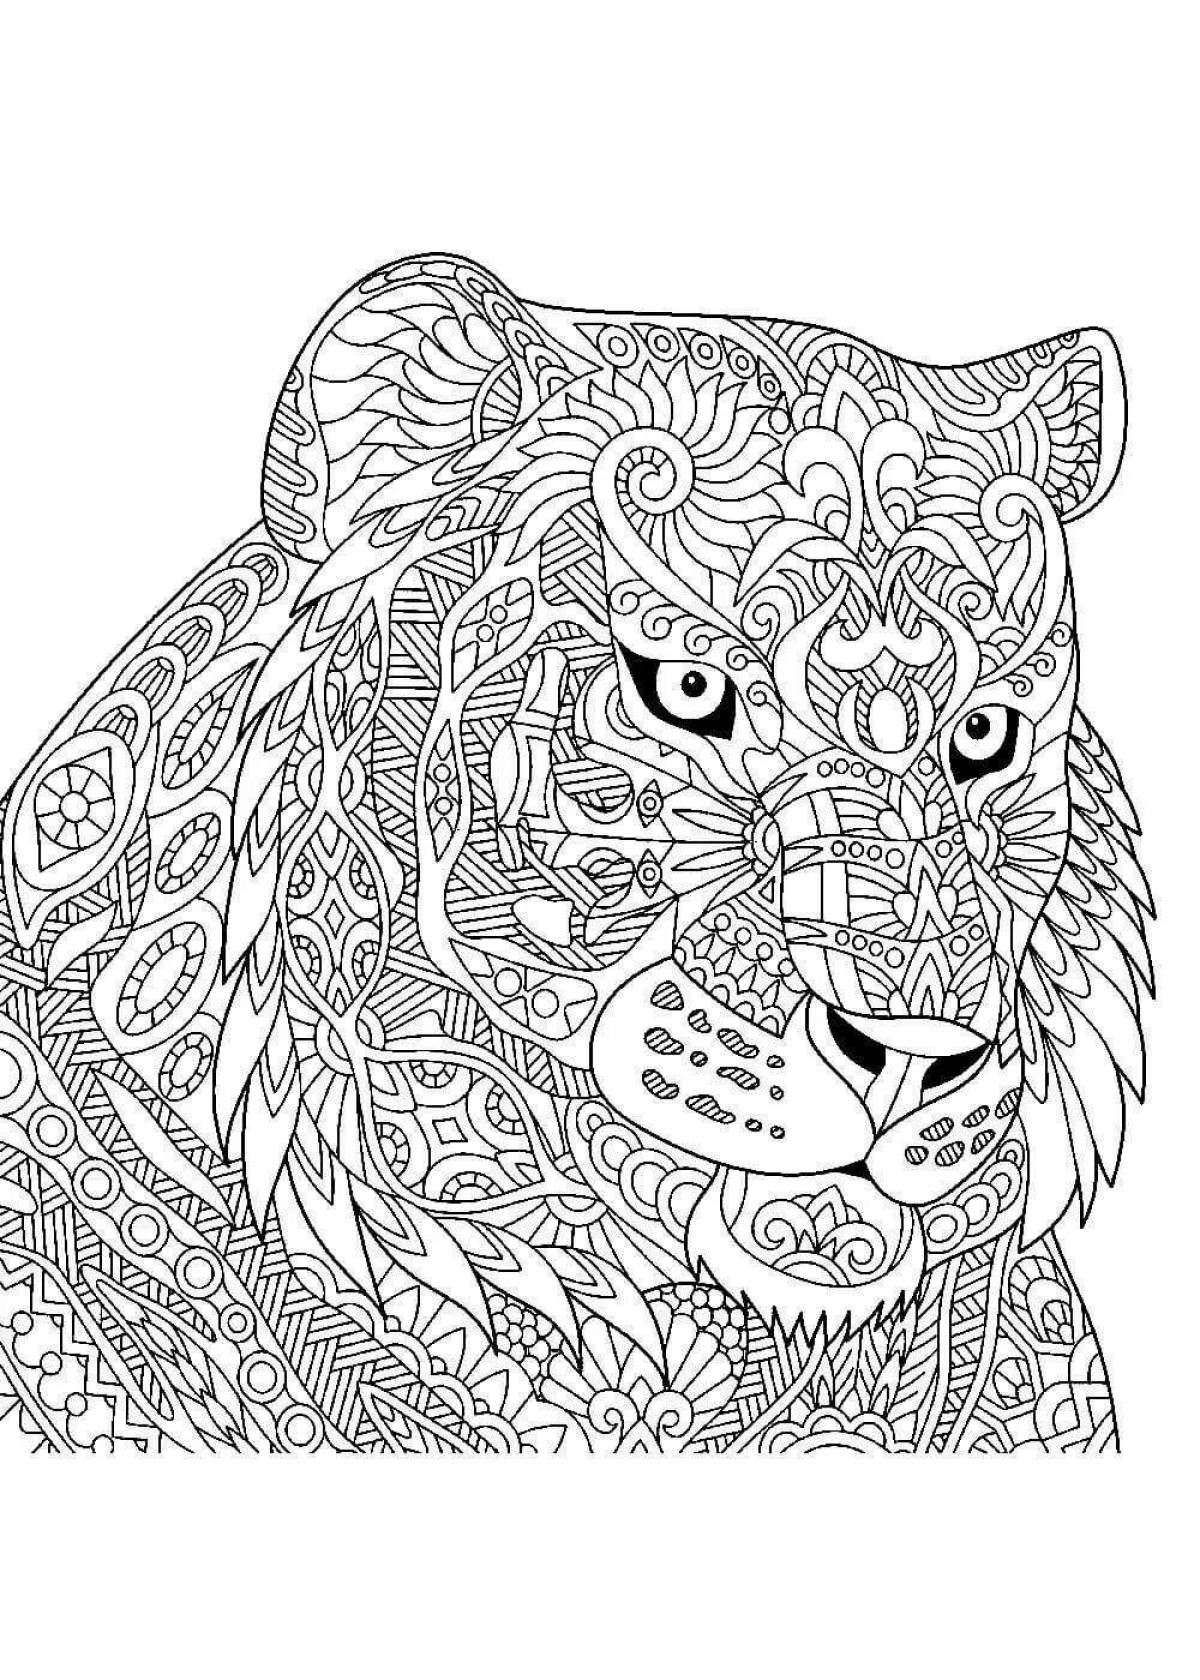 Awesome coloring book 2022